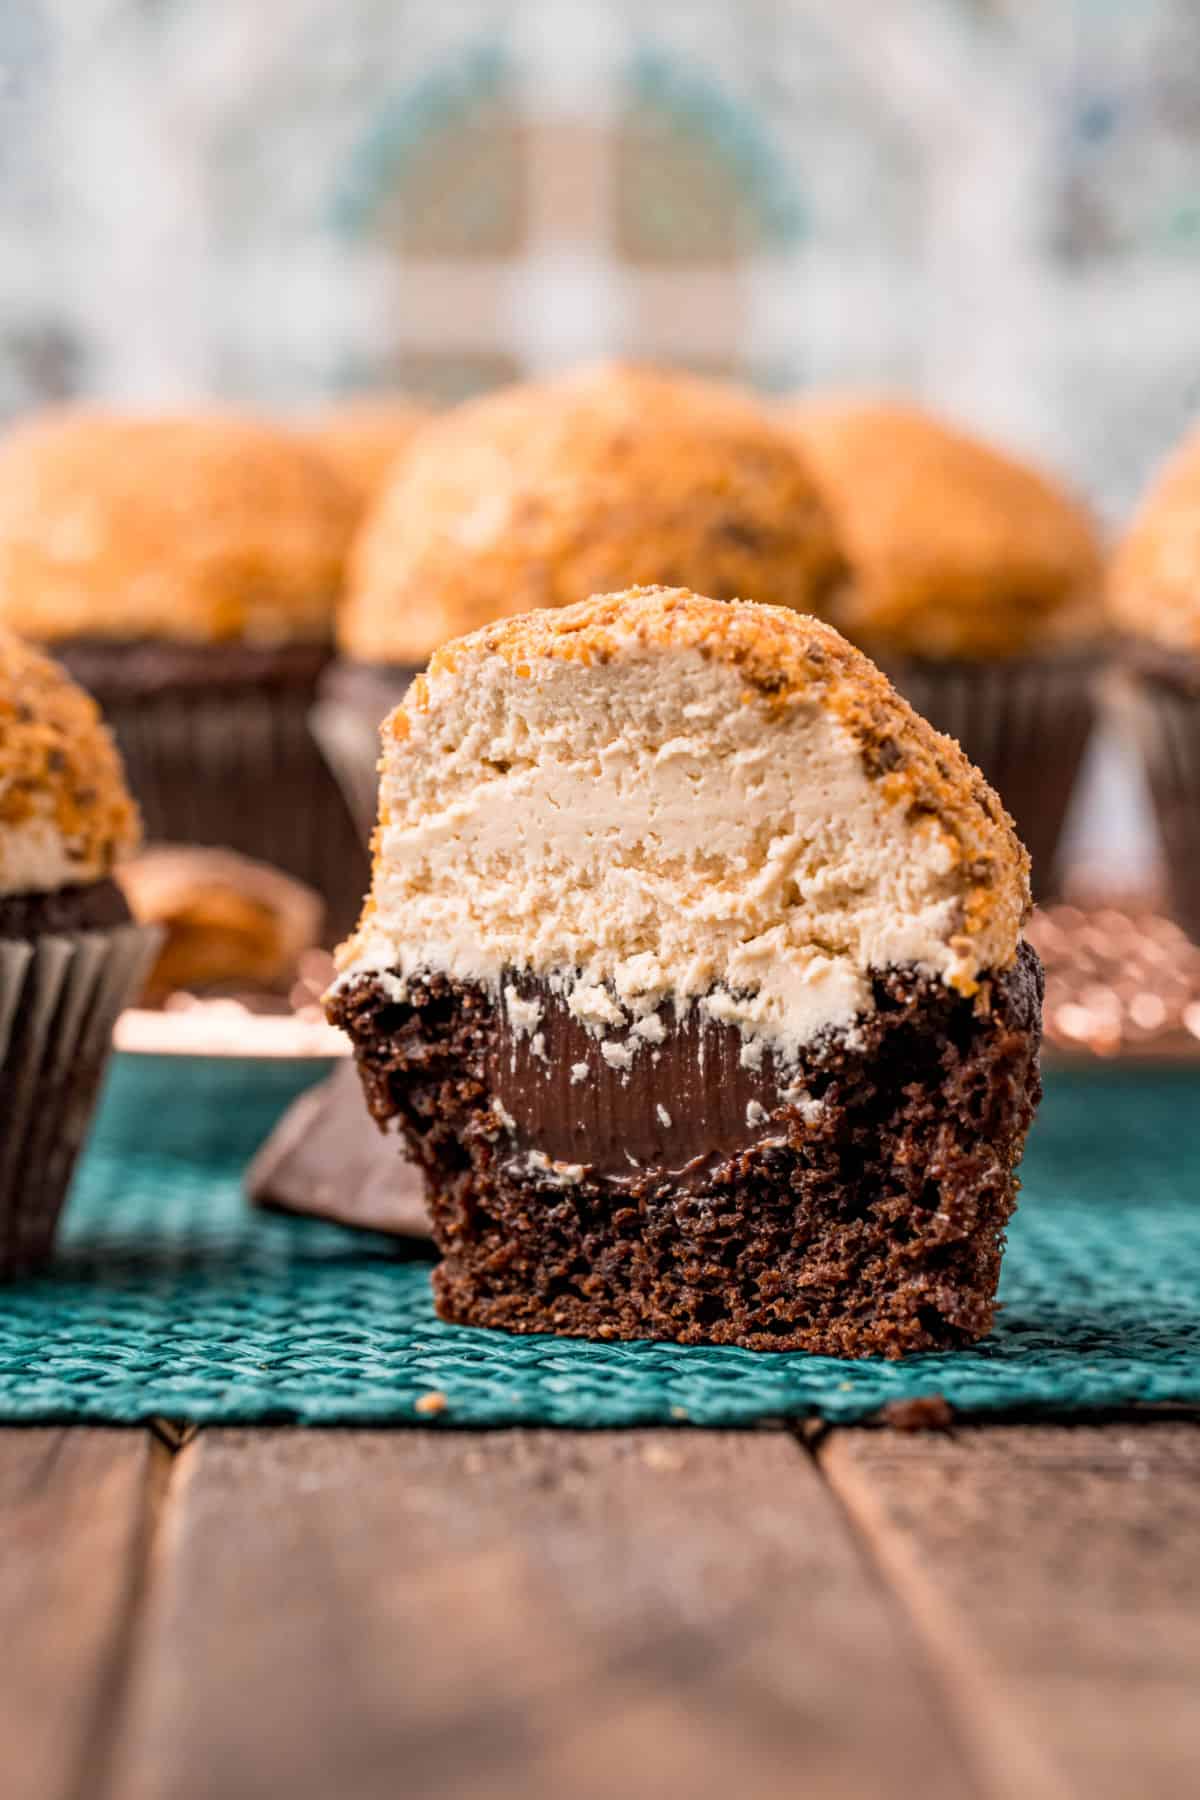 Chocolate cupcake sliced in half revealing fudge filling, peanut butter frosting, and butterfinger candy topping.